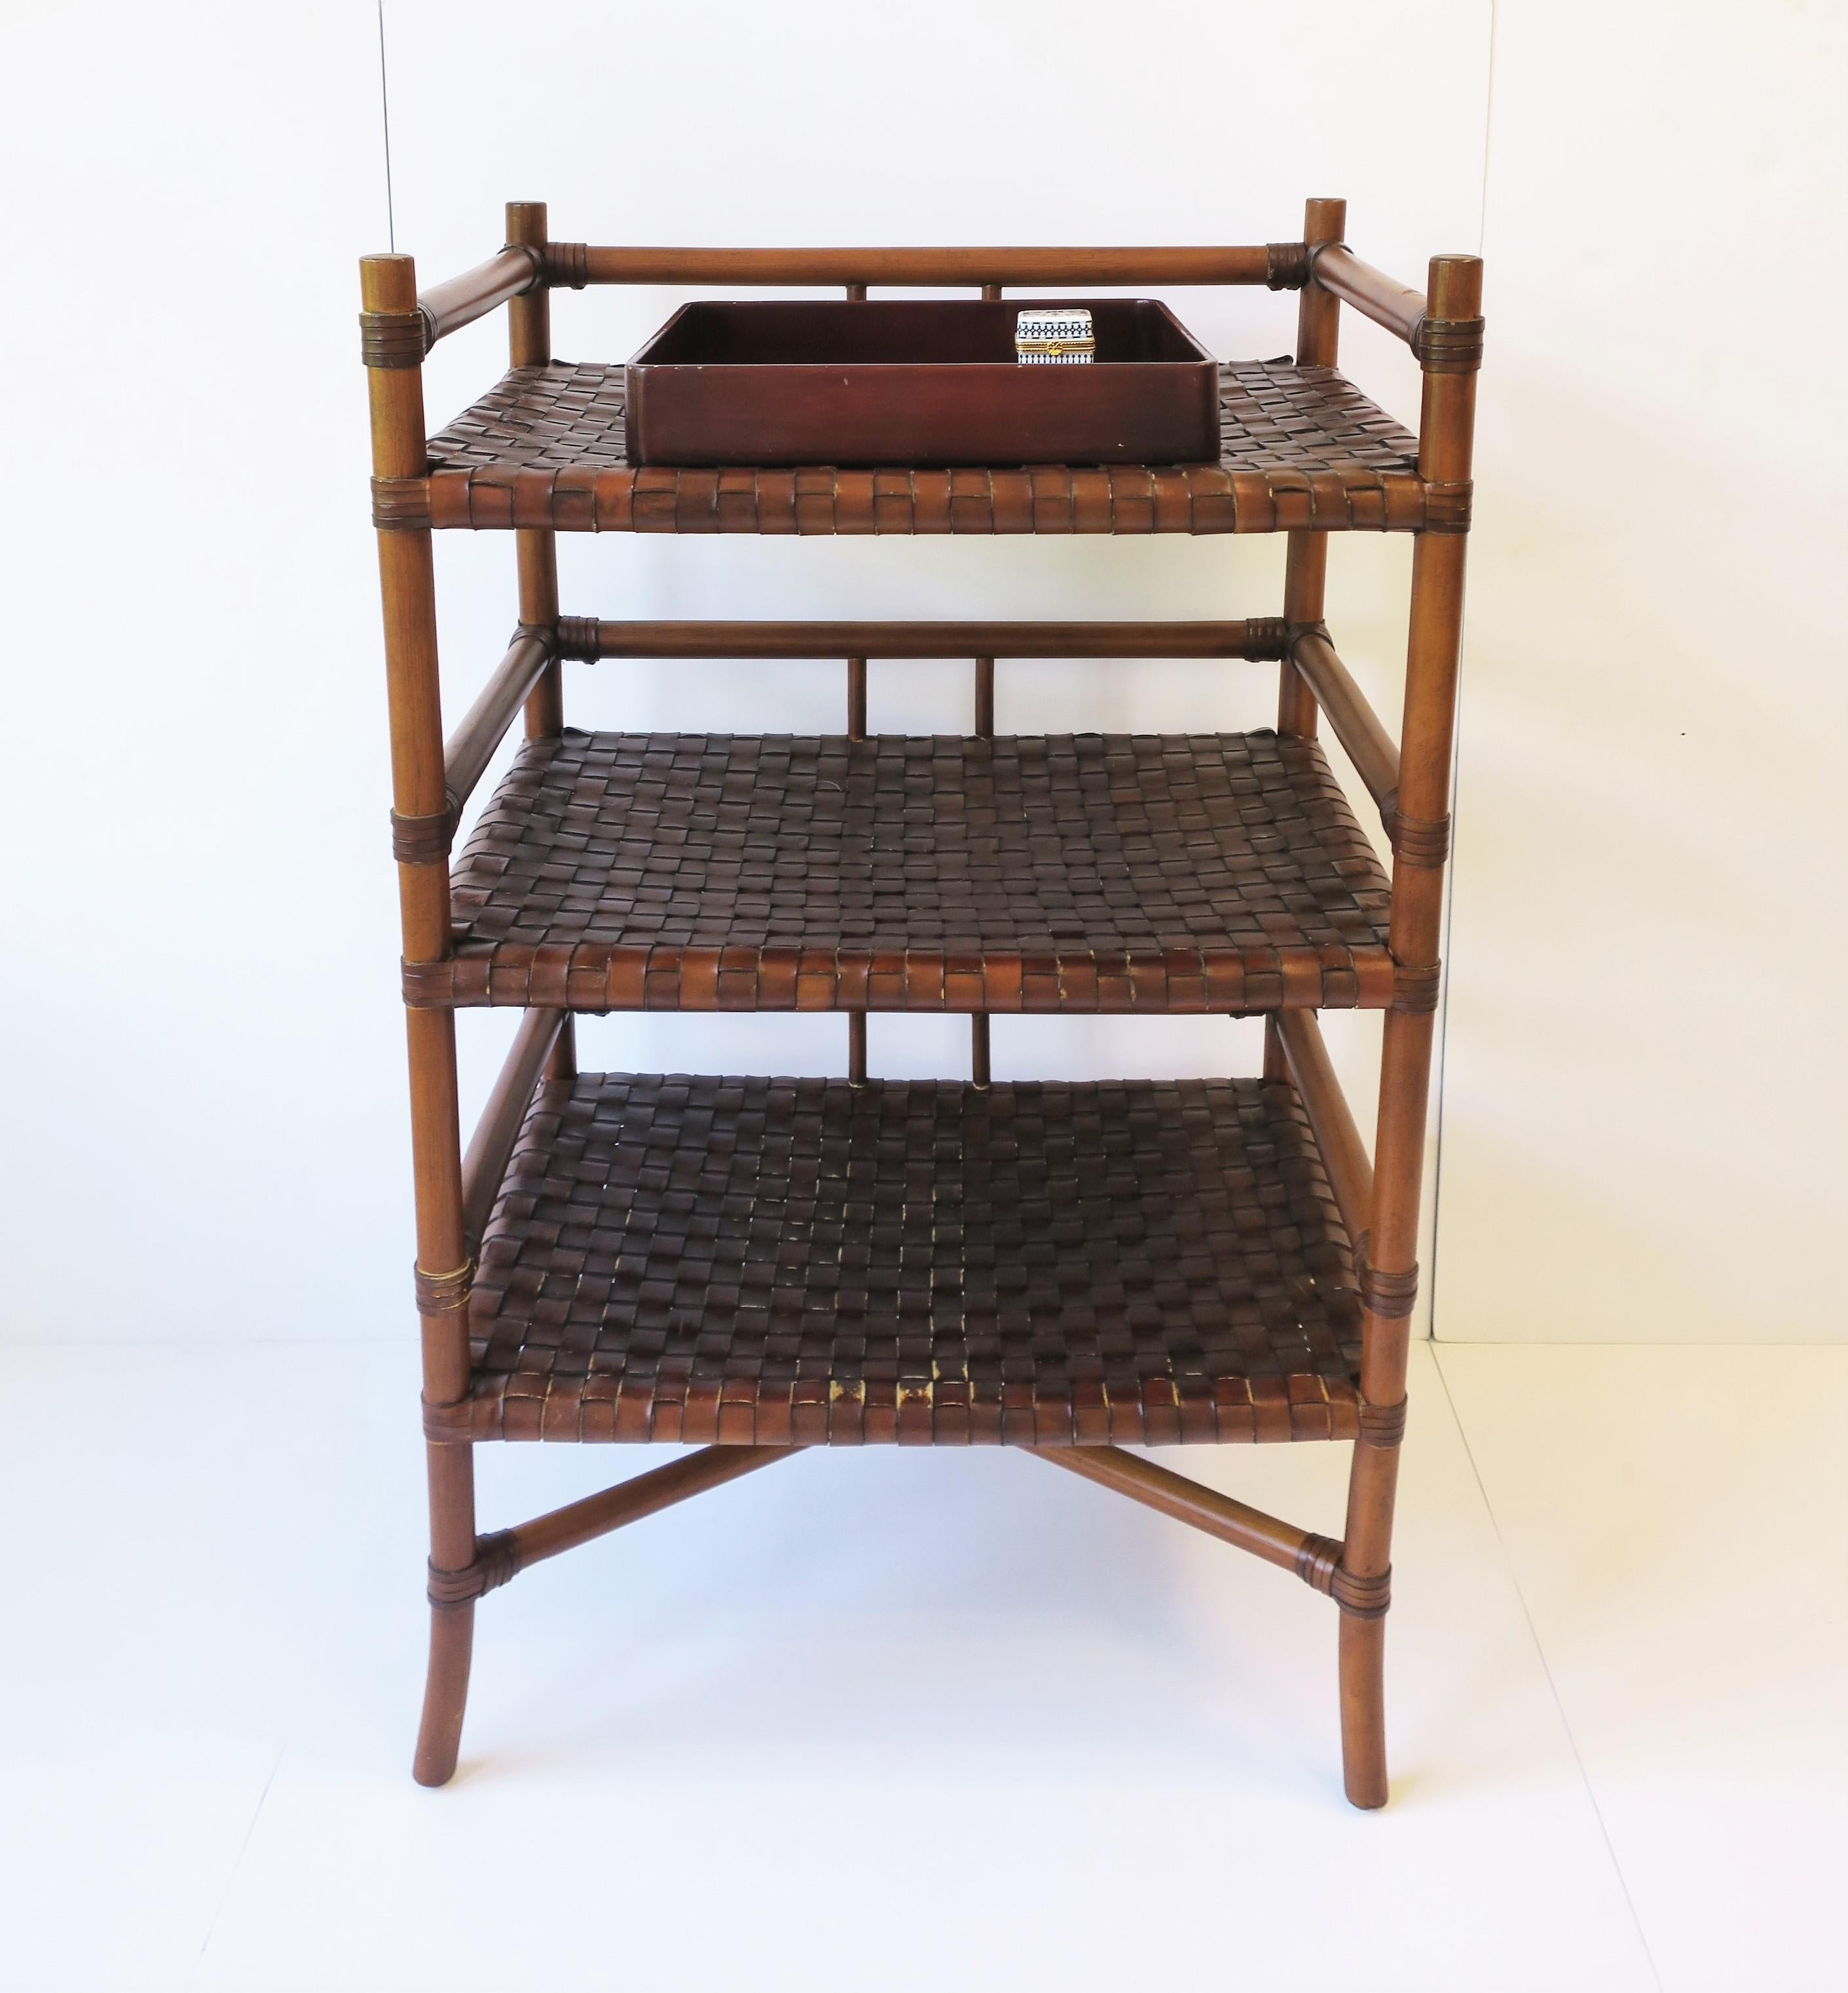 20th Century Storage Étagère with Leather Weaved Shelves